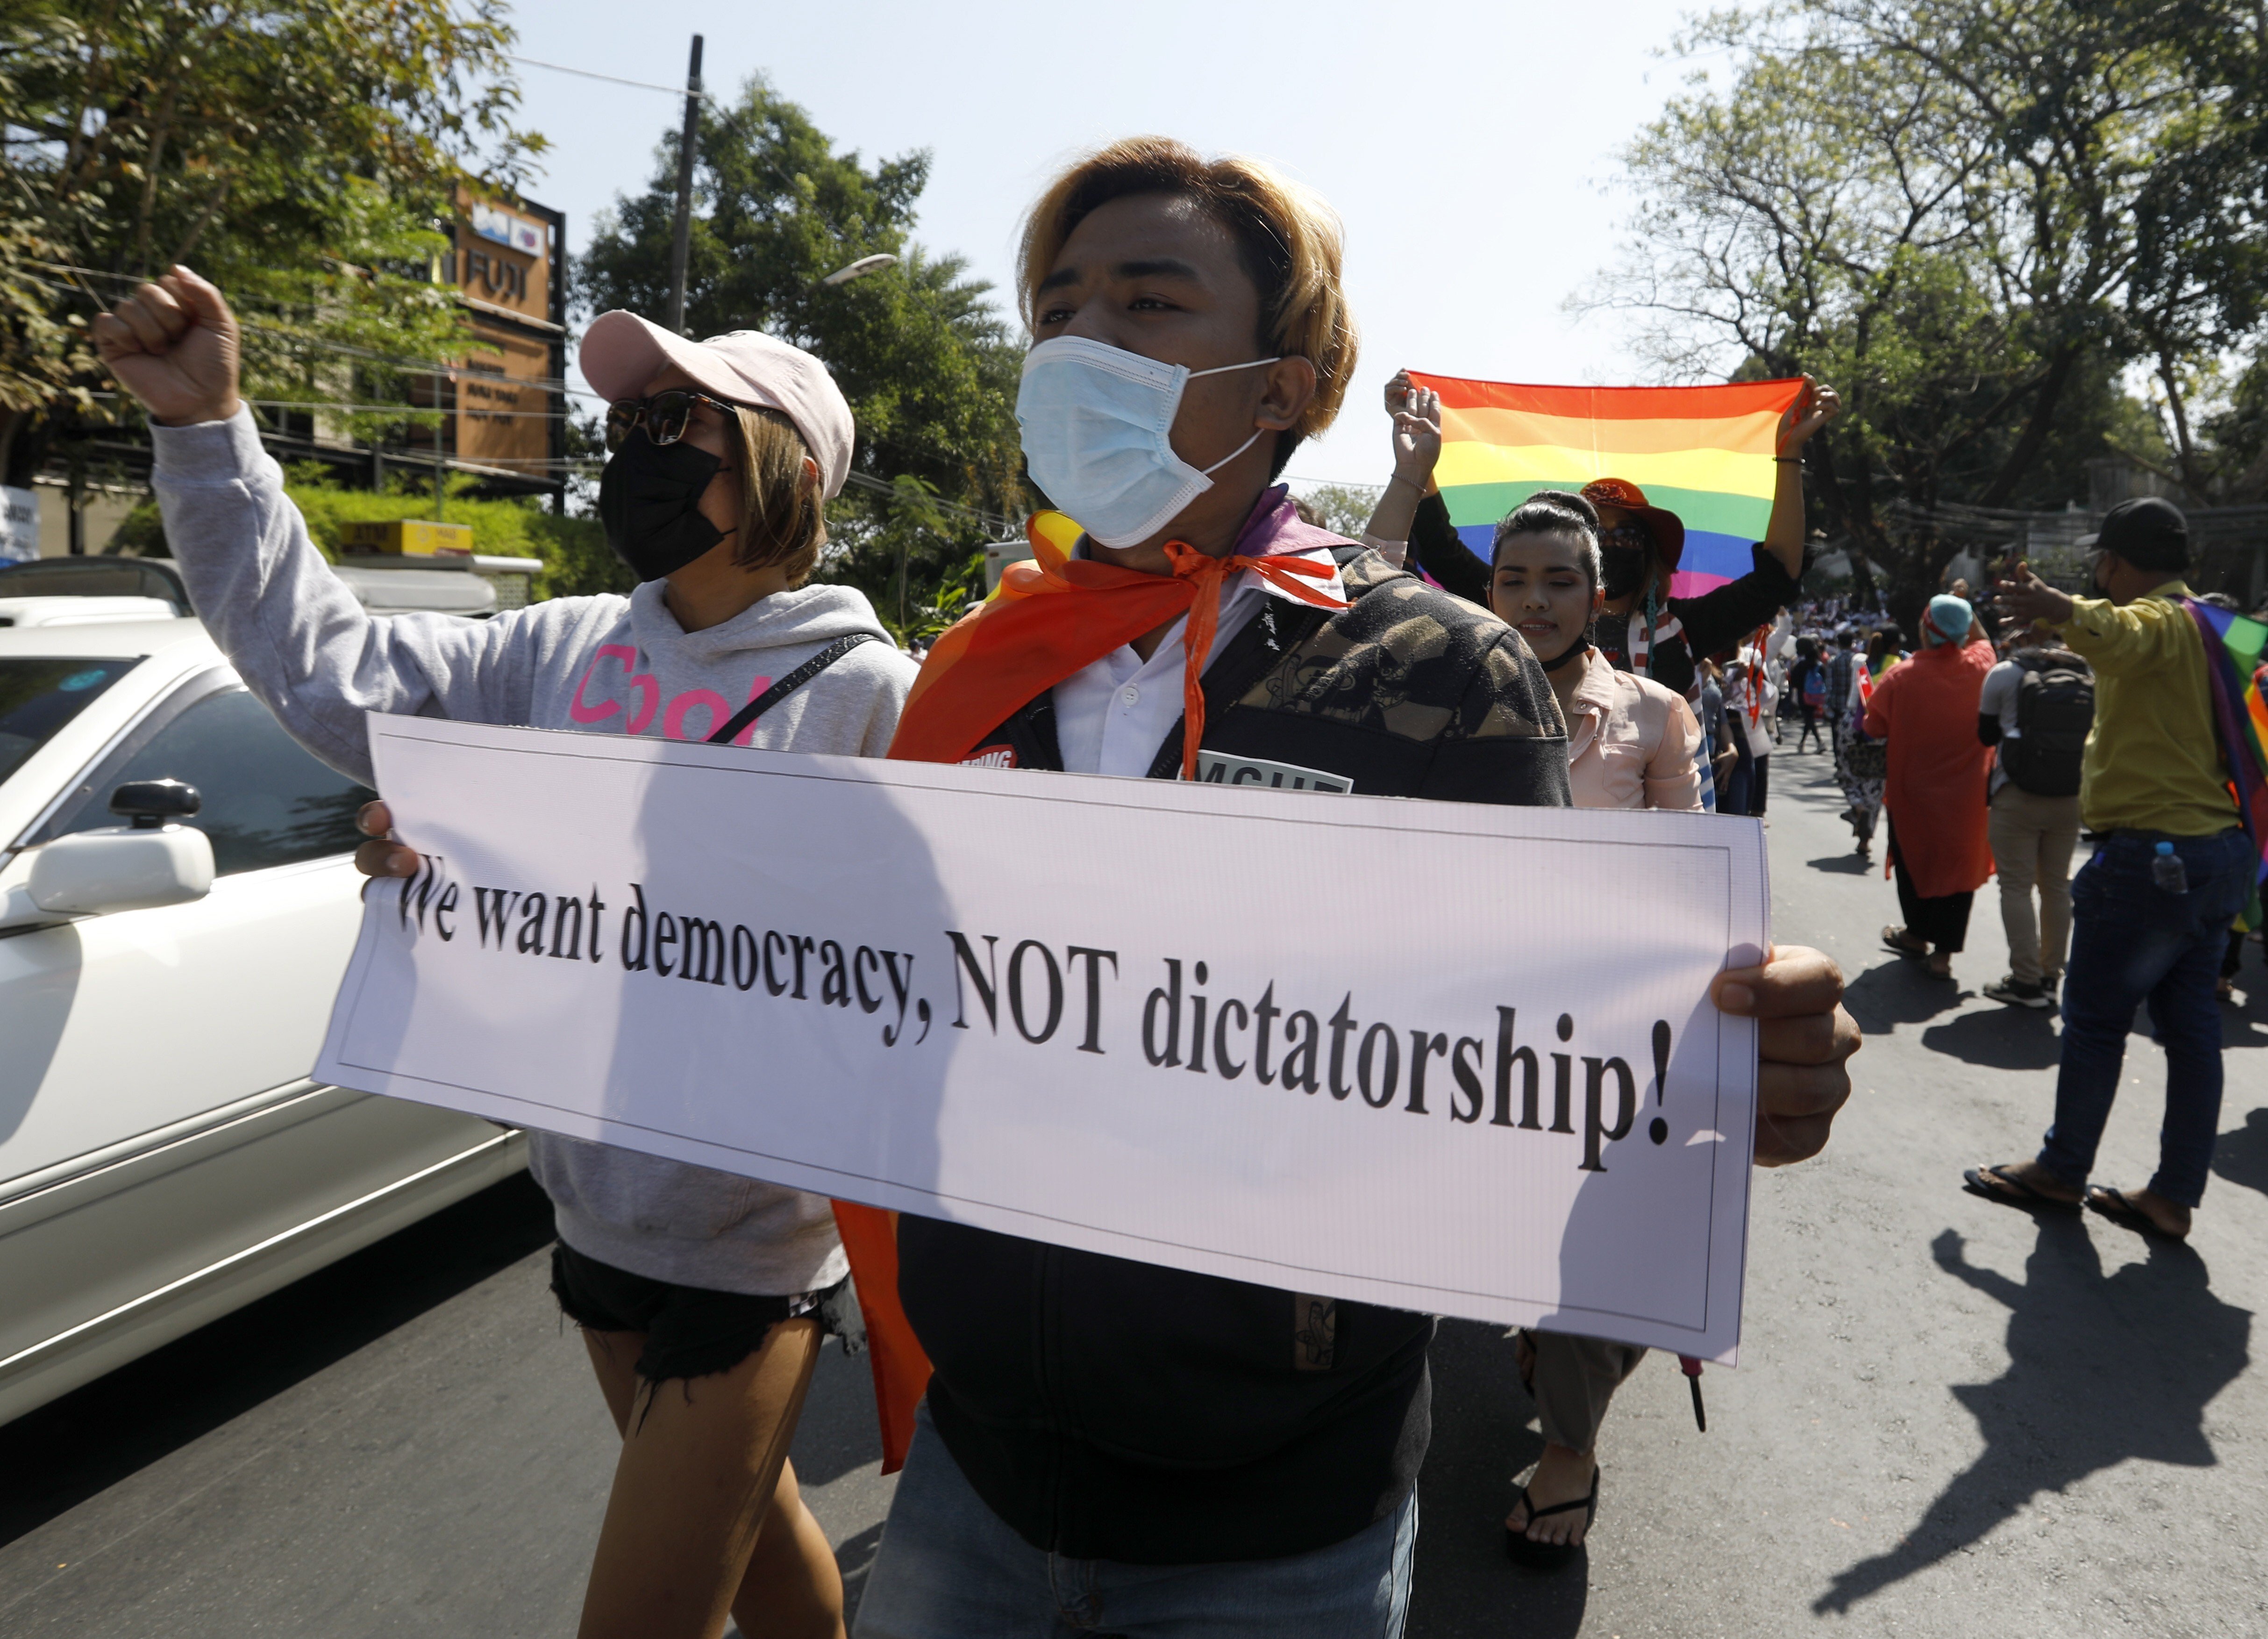 Protesters hold placards and shout slogans as they march in front of the US embassy during a demonstration against the military coup, in Yangon, Myanmar, on February 10. People have continued to rally across the country despite orders banning mass gatherings and reports of increasing use of force by police against anti-coup protesters. Photo: EPA-EFE